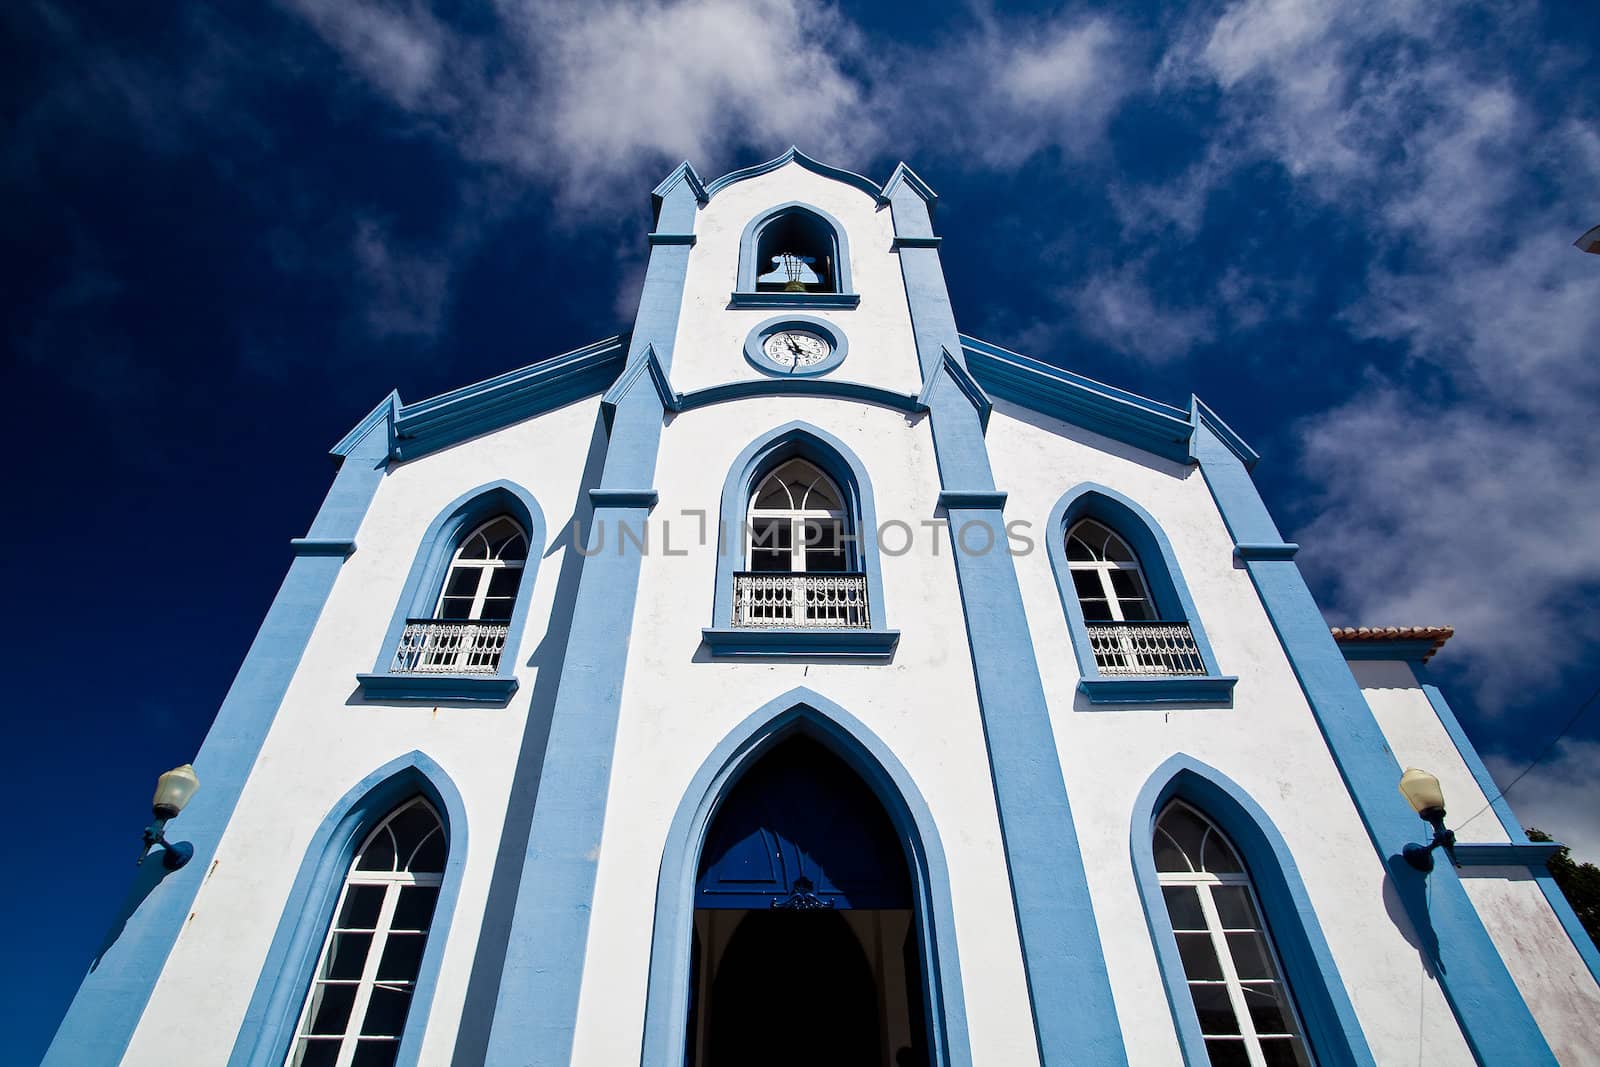 The blue church by CaptureLight